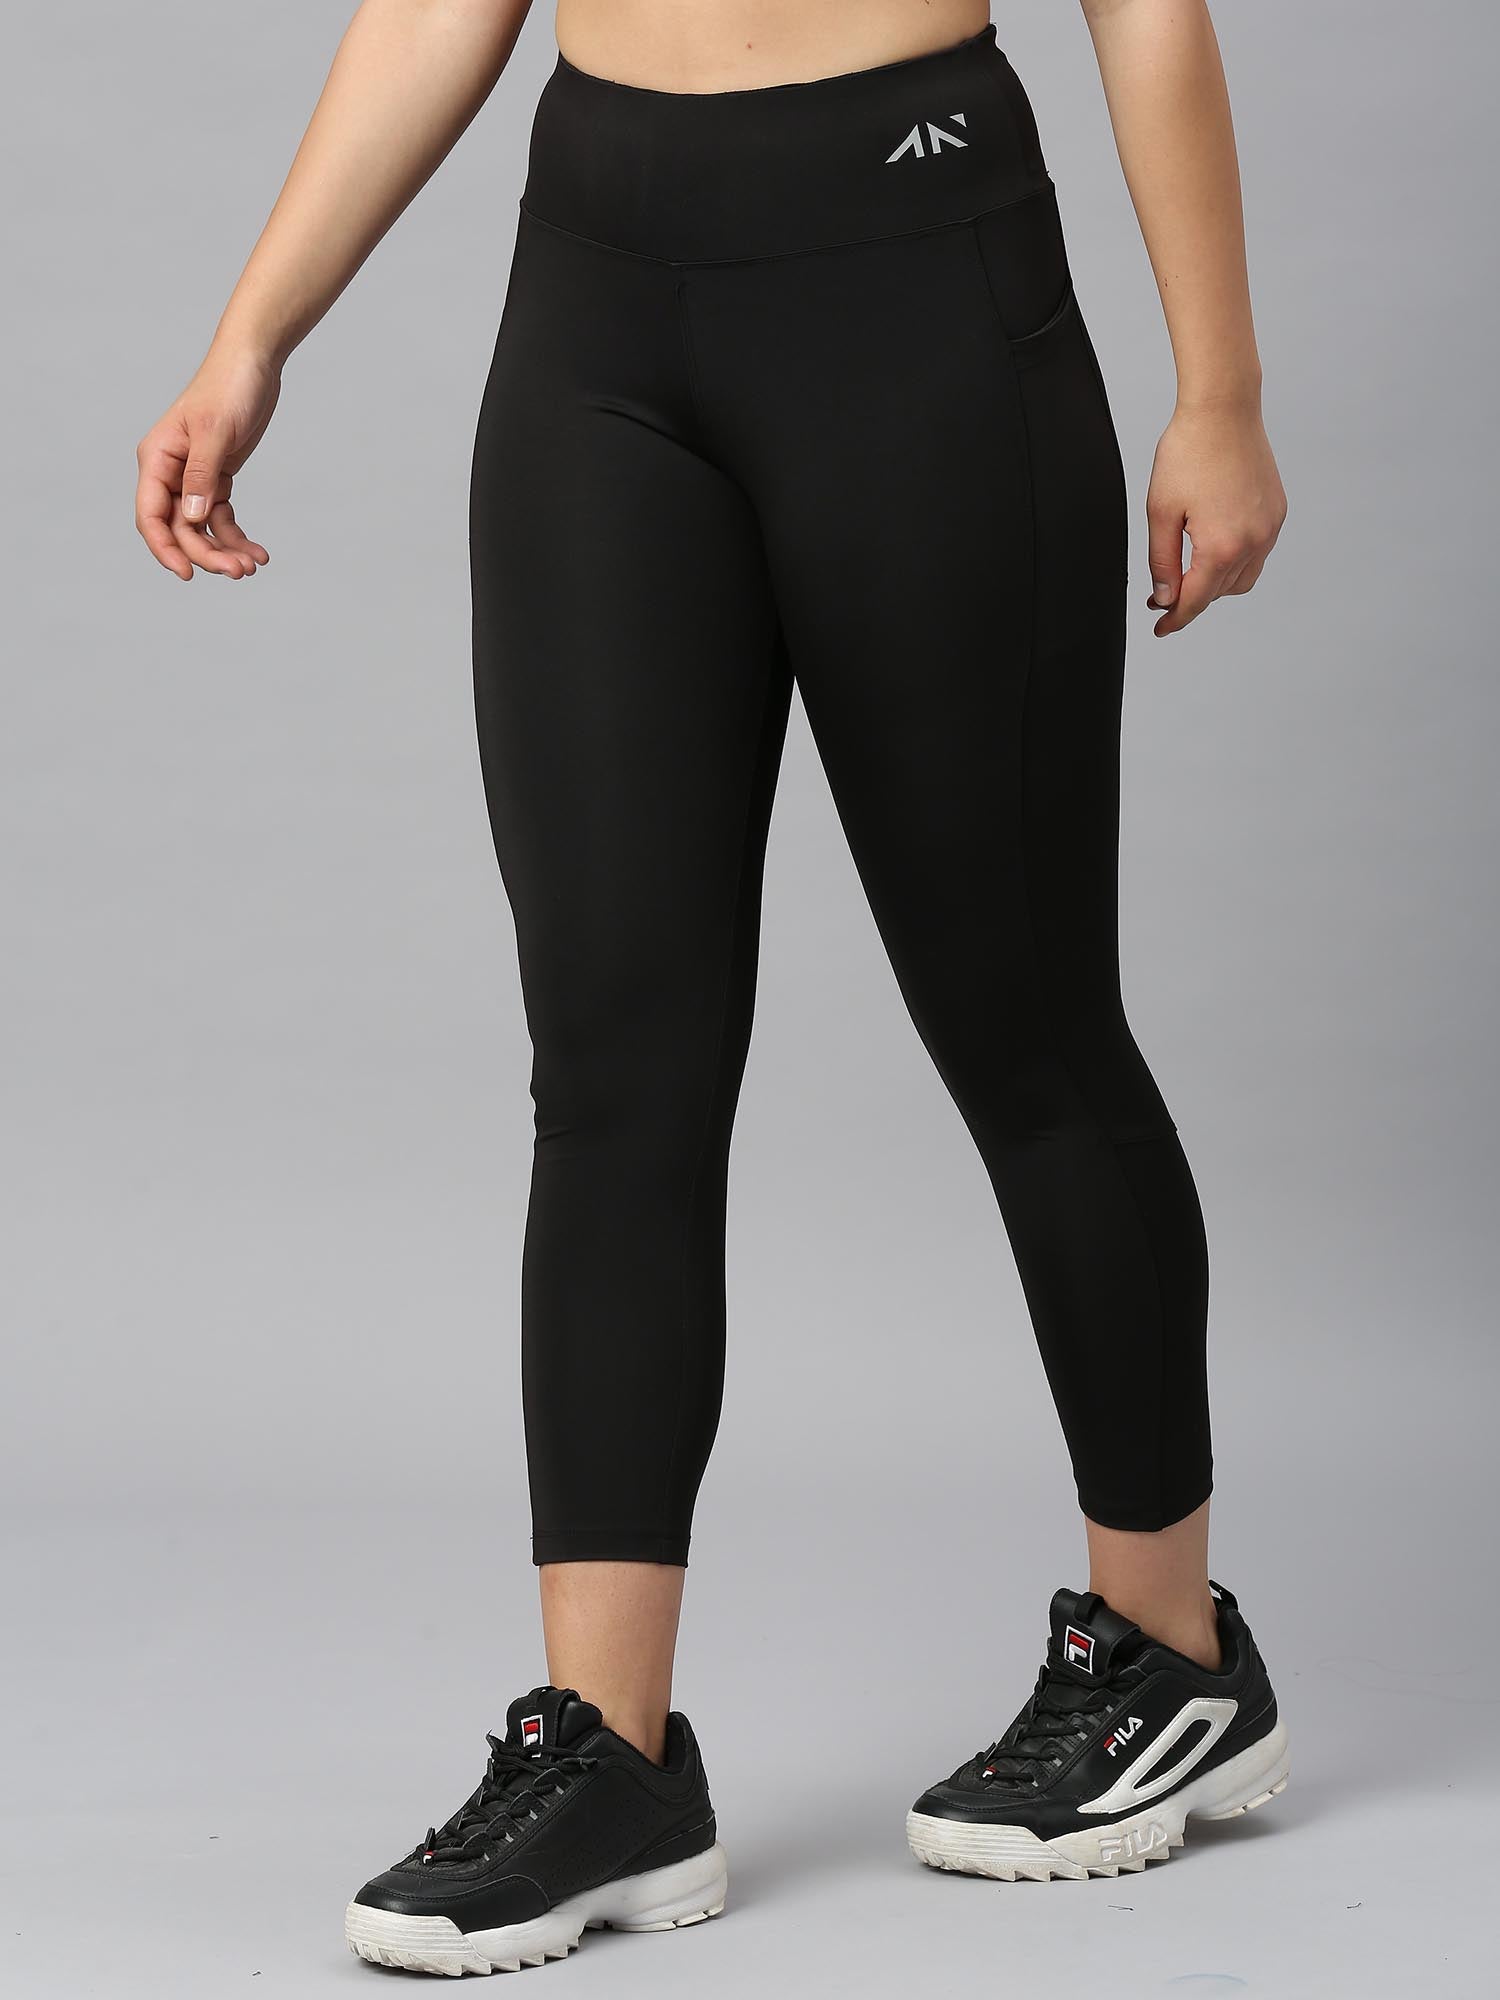 Four Way Lycra Sports Wear Ladies Gym Tights at Rs 200 in New Delhi | ID:  21986799430